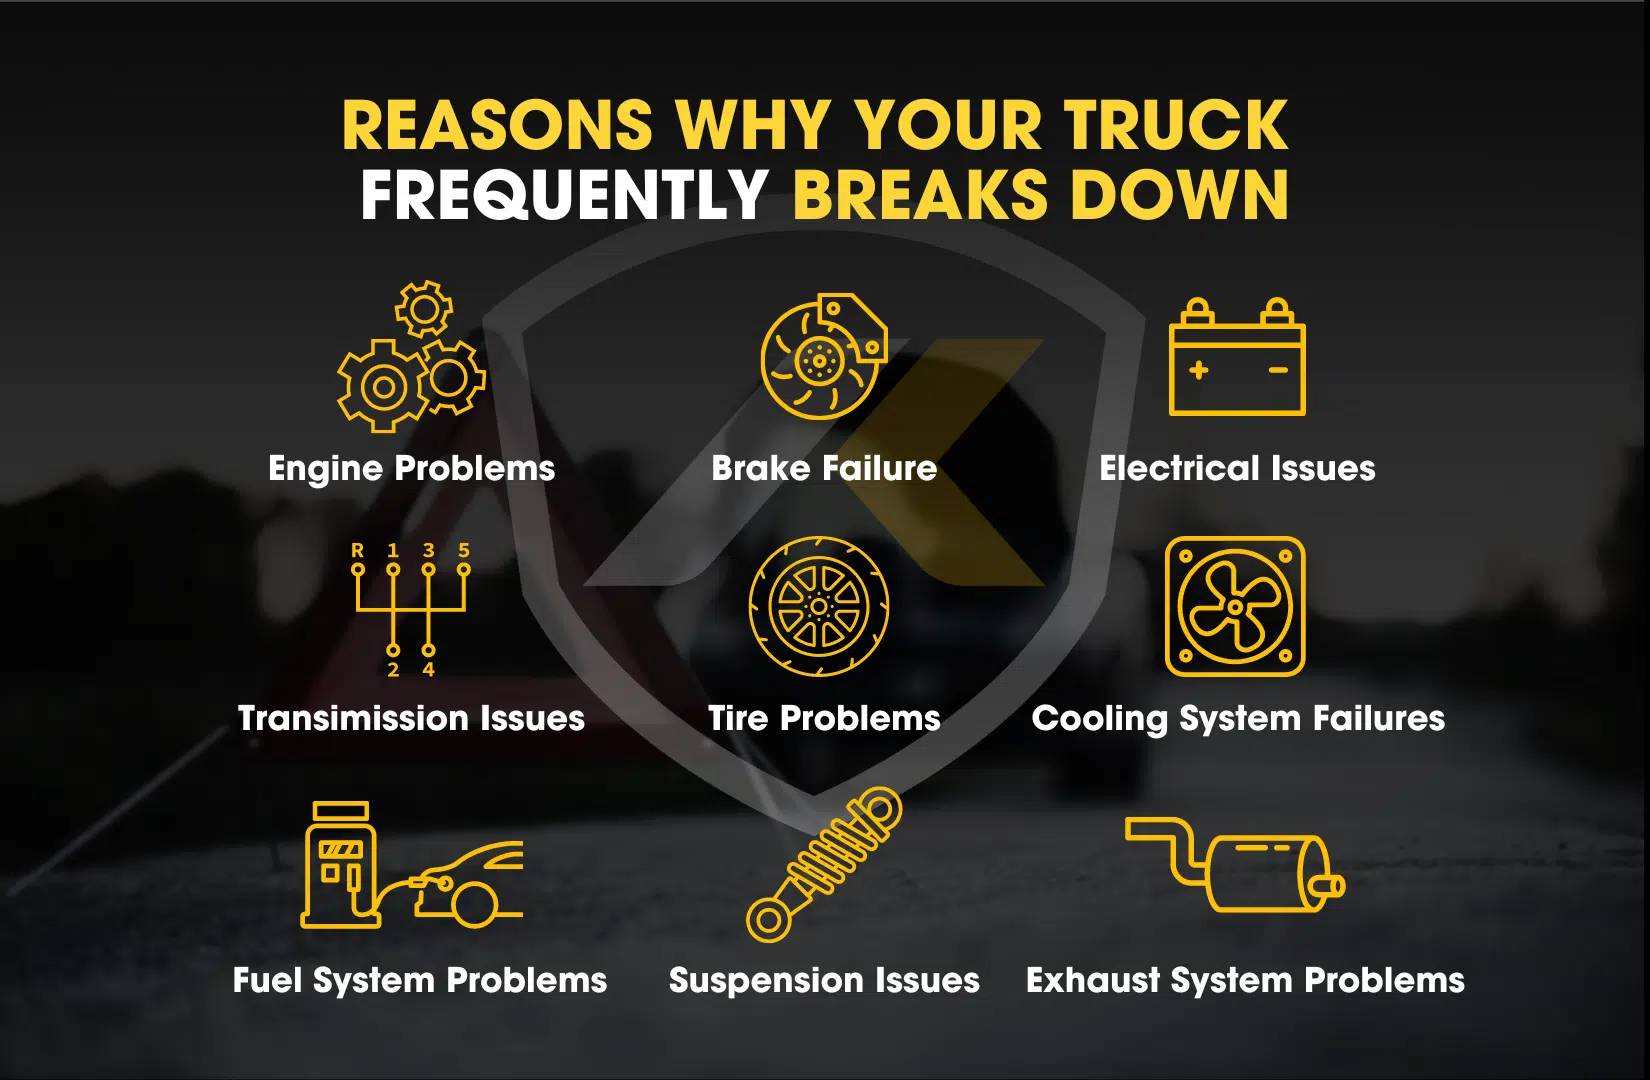 Reasons why your truck frequently breaks down